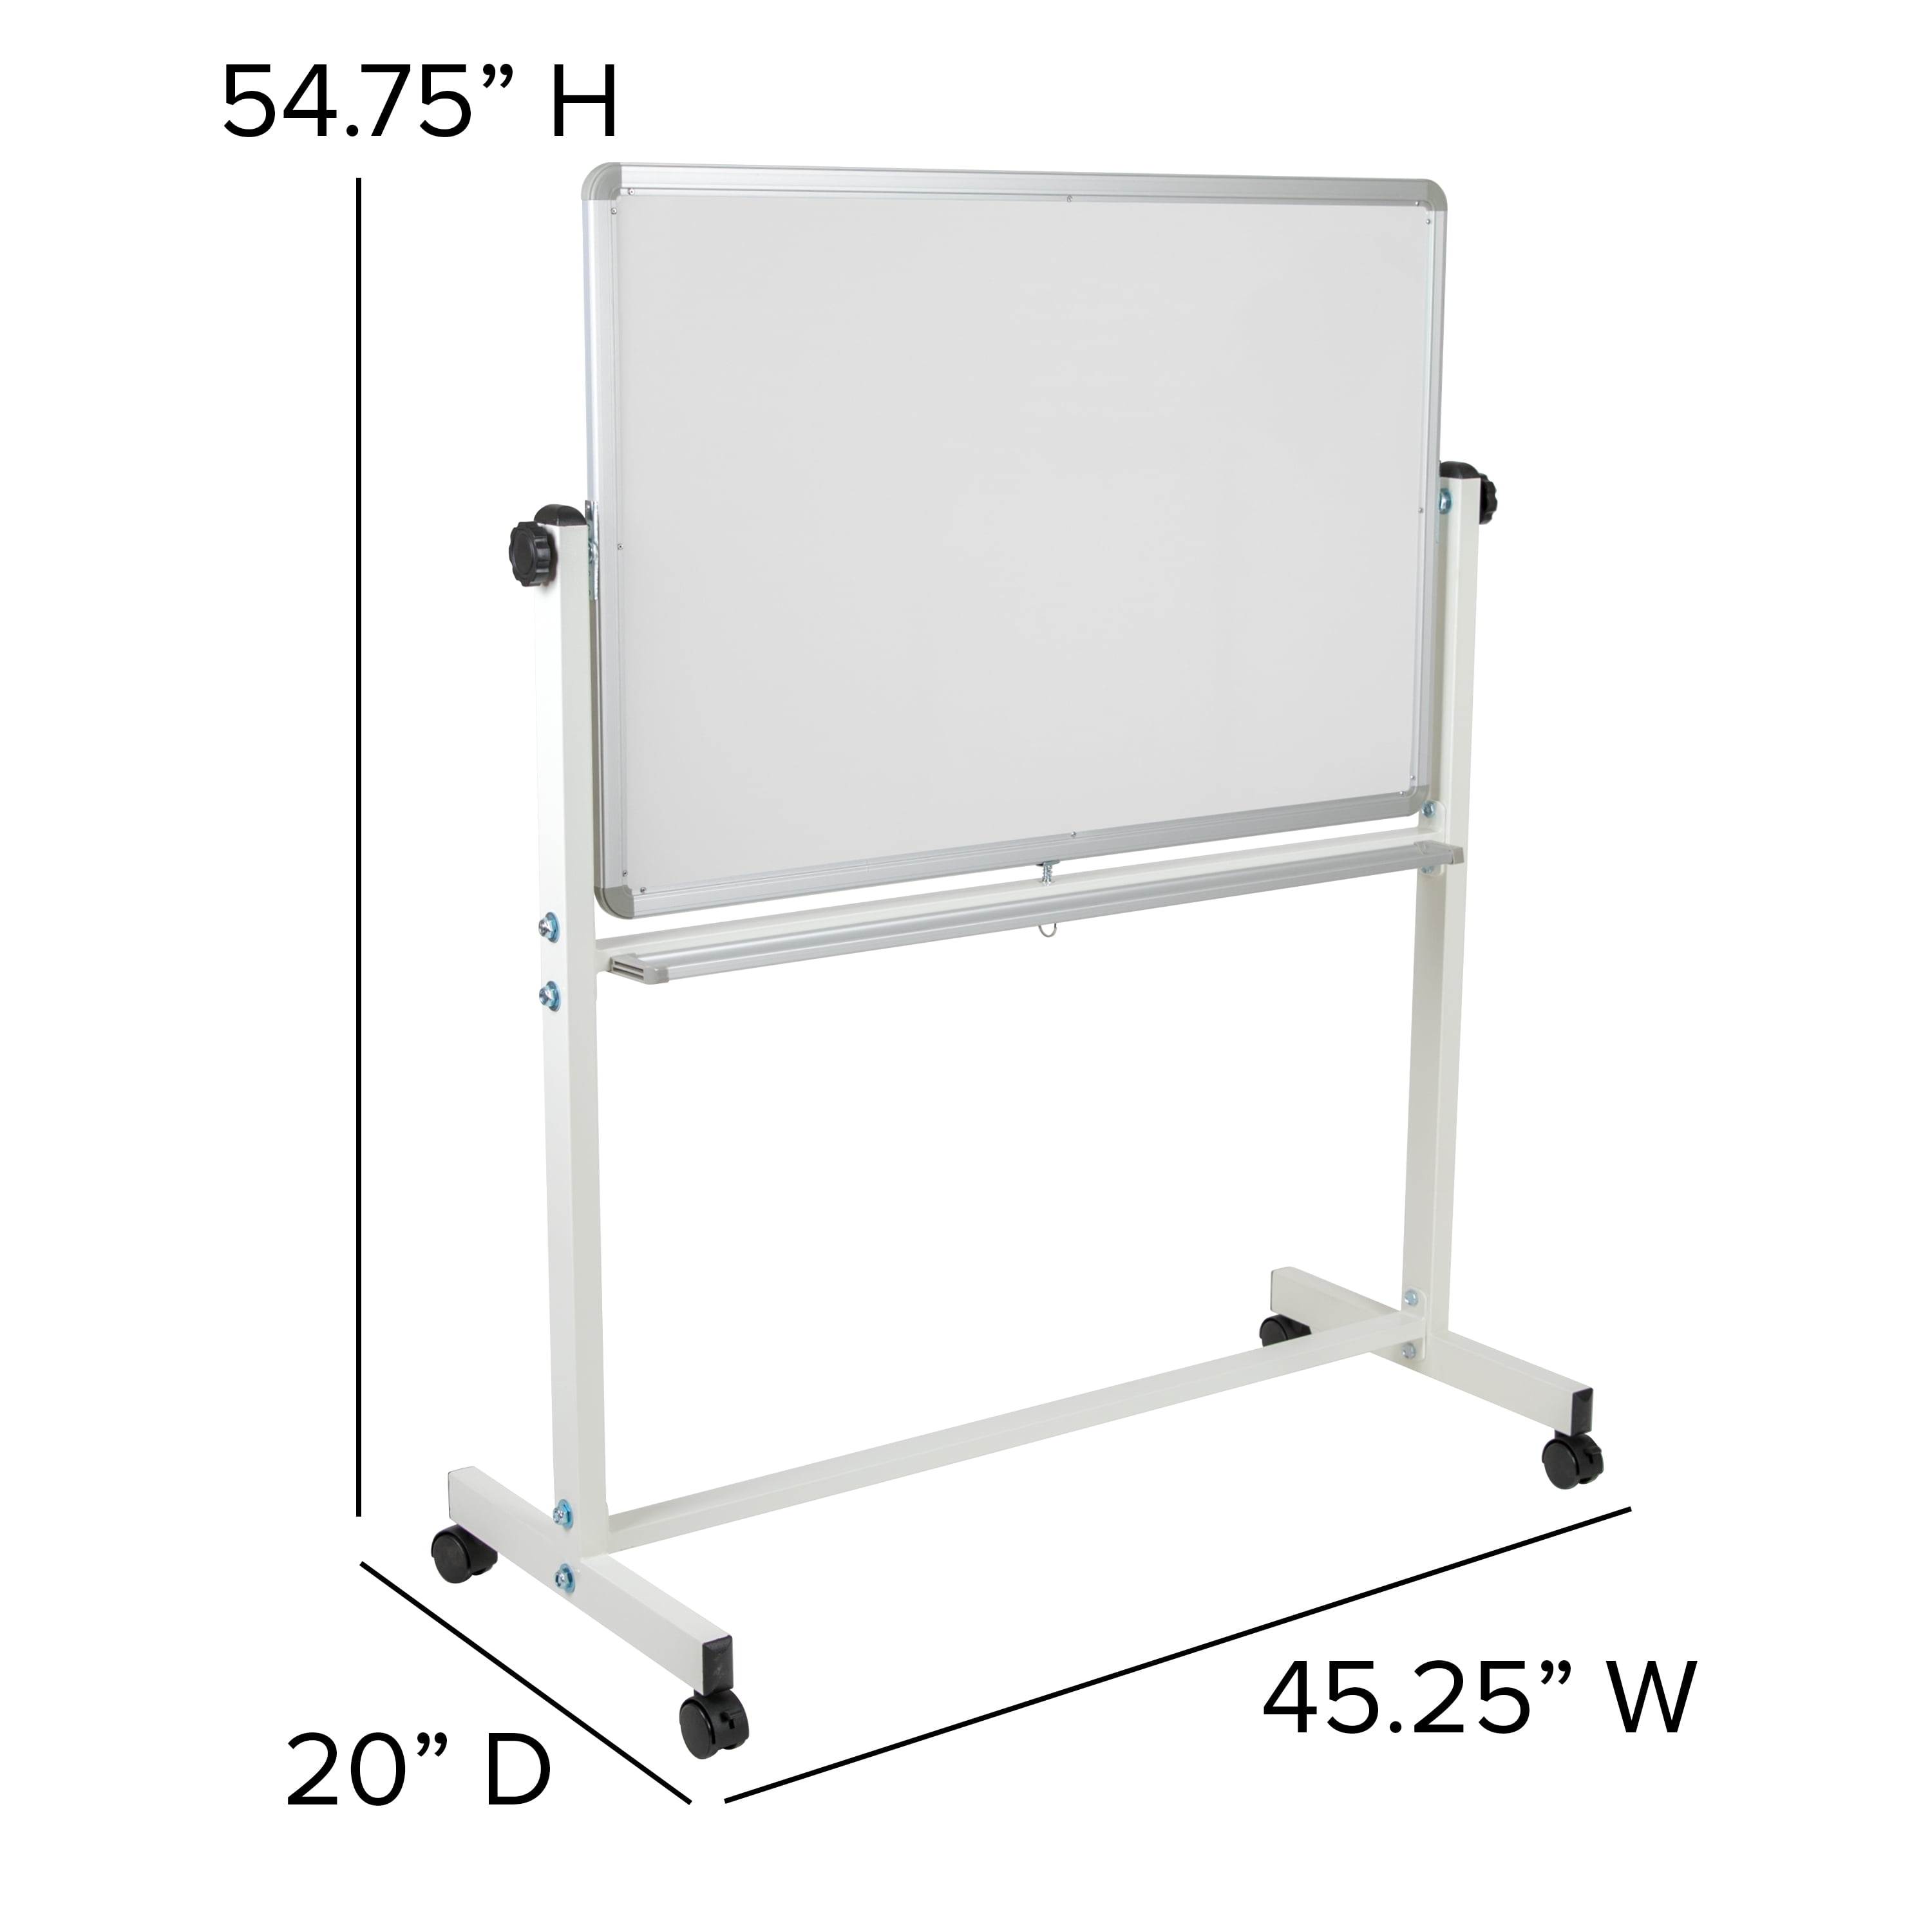 PARTNER – DOUBLE SIDED WHITE BOARD WITH STANDS – Ay stationery